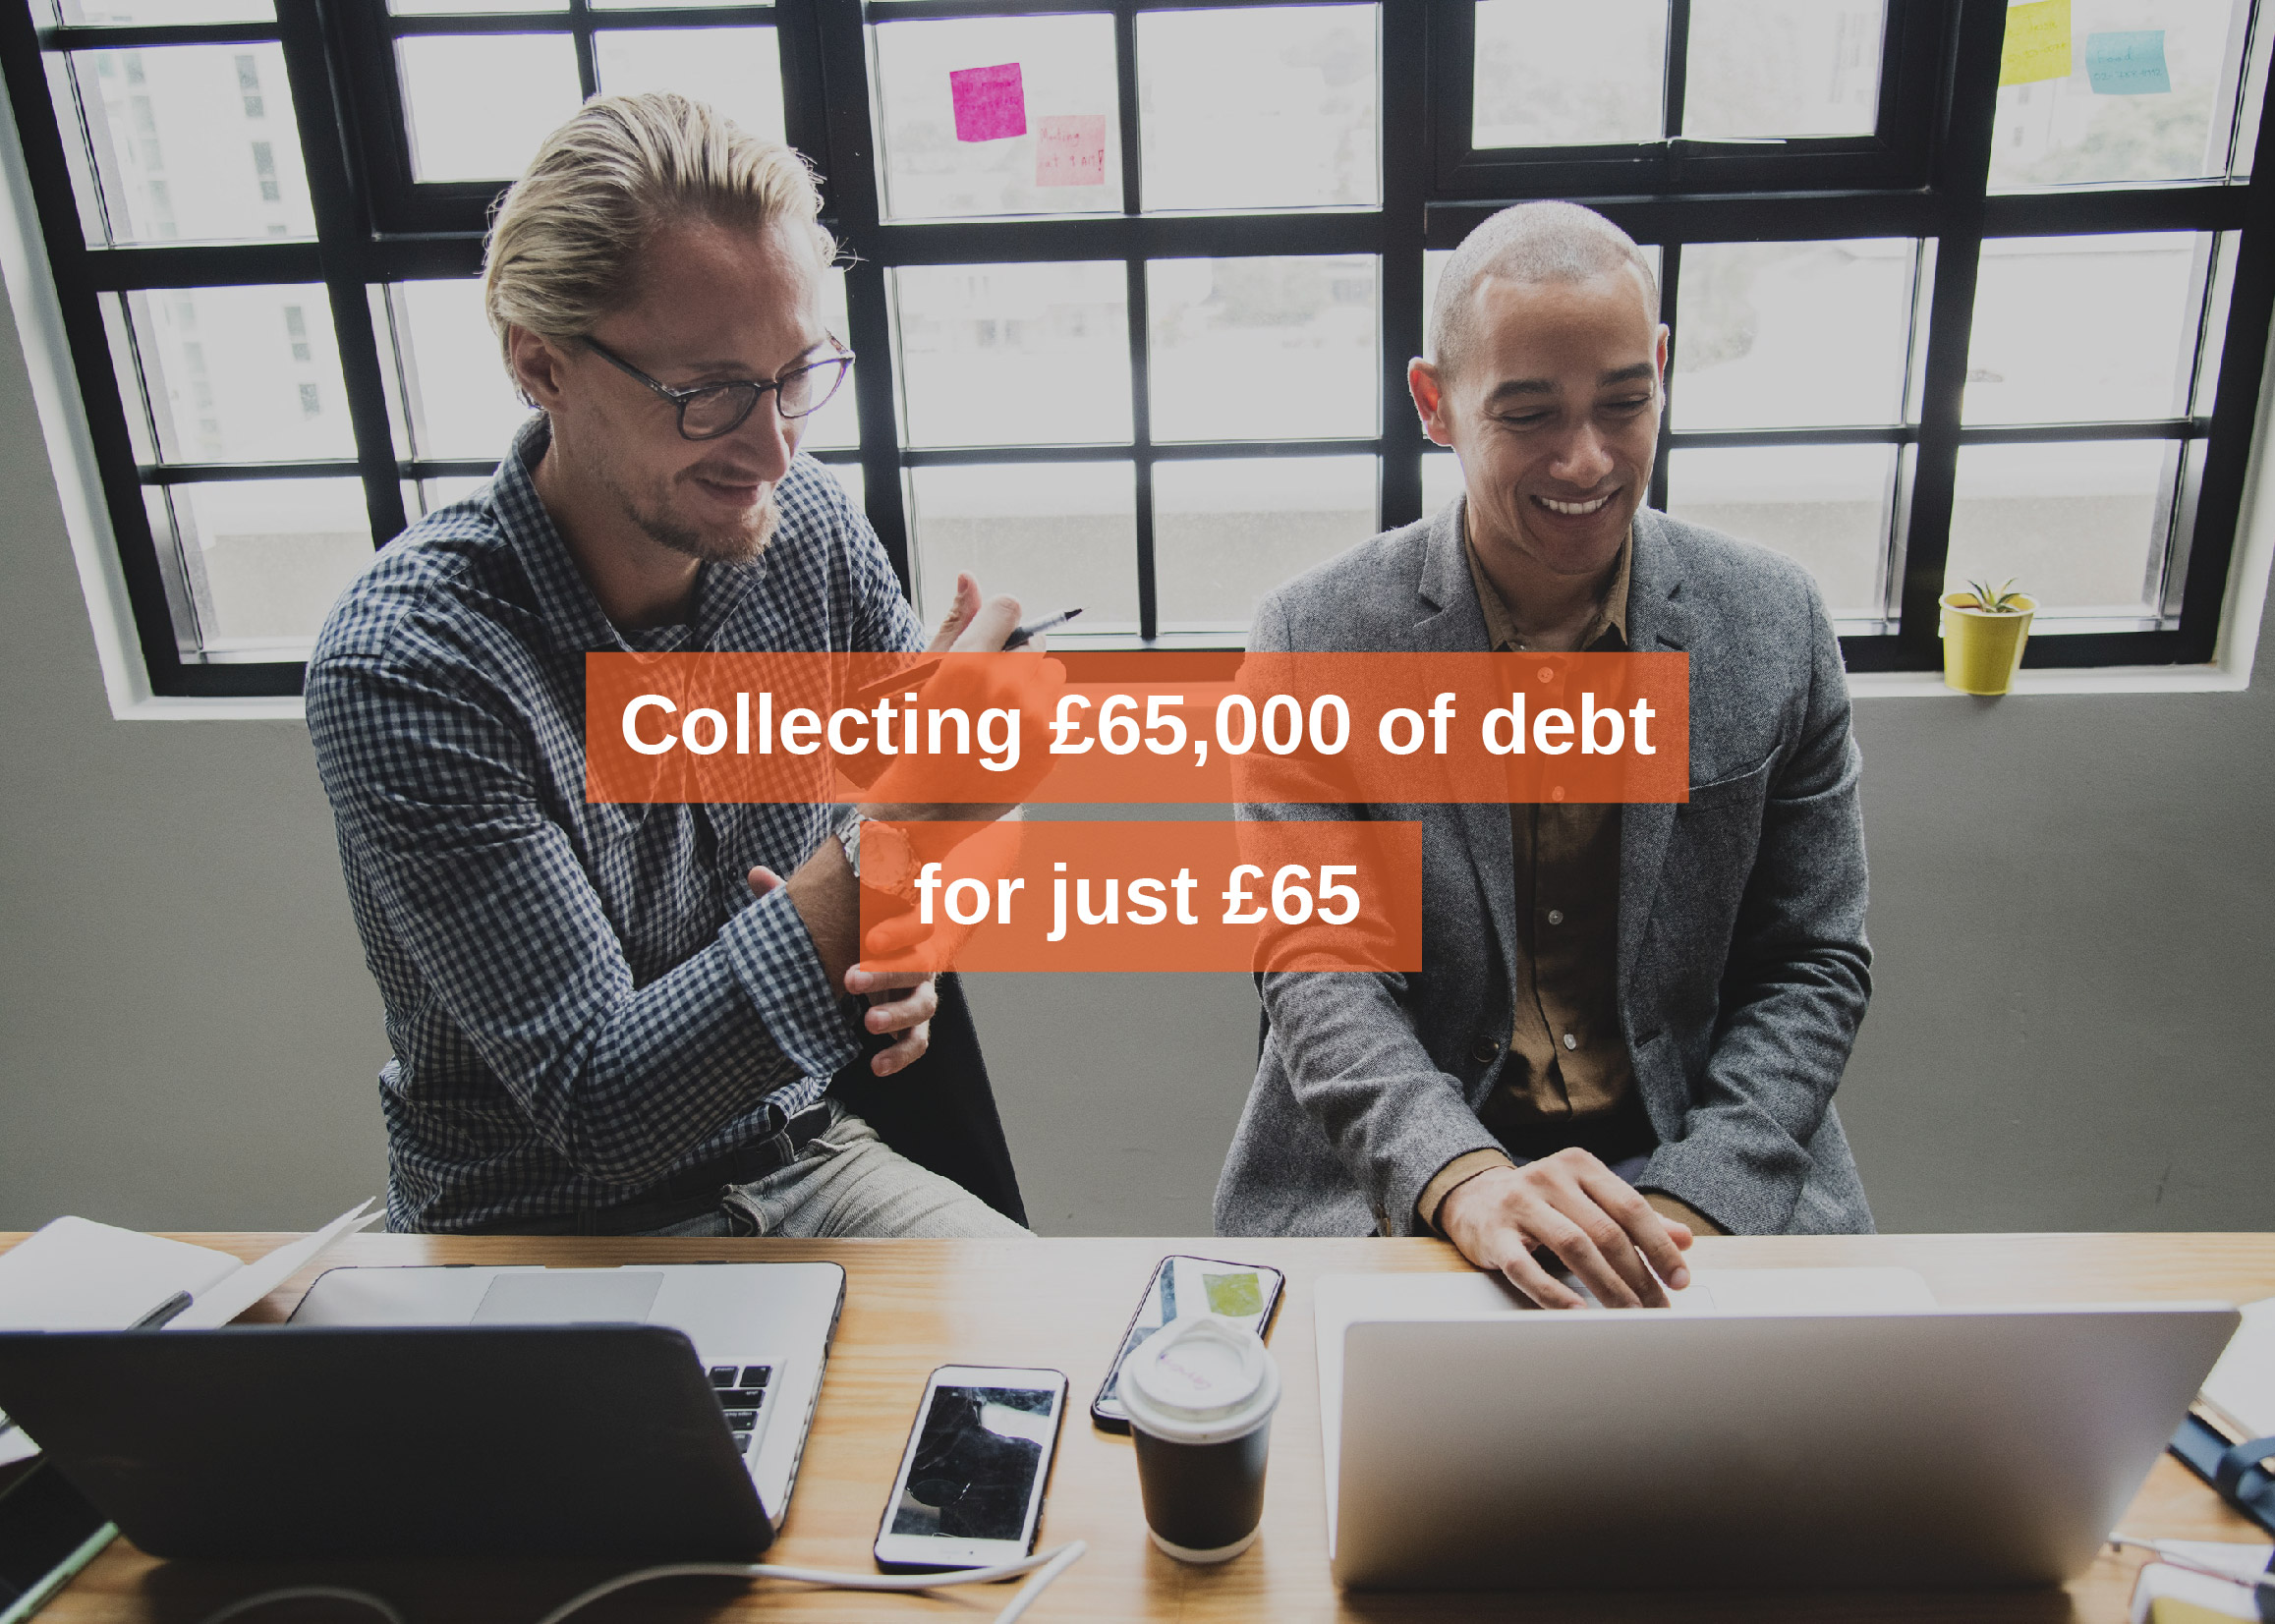 Collecting £65,000 of debt for just £65